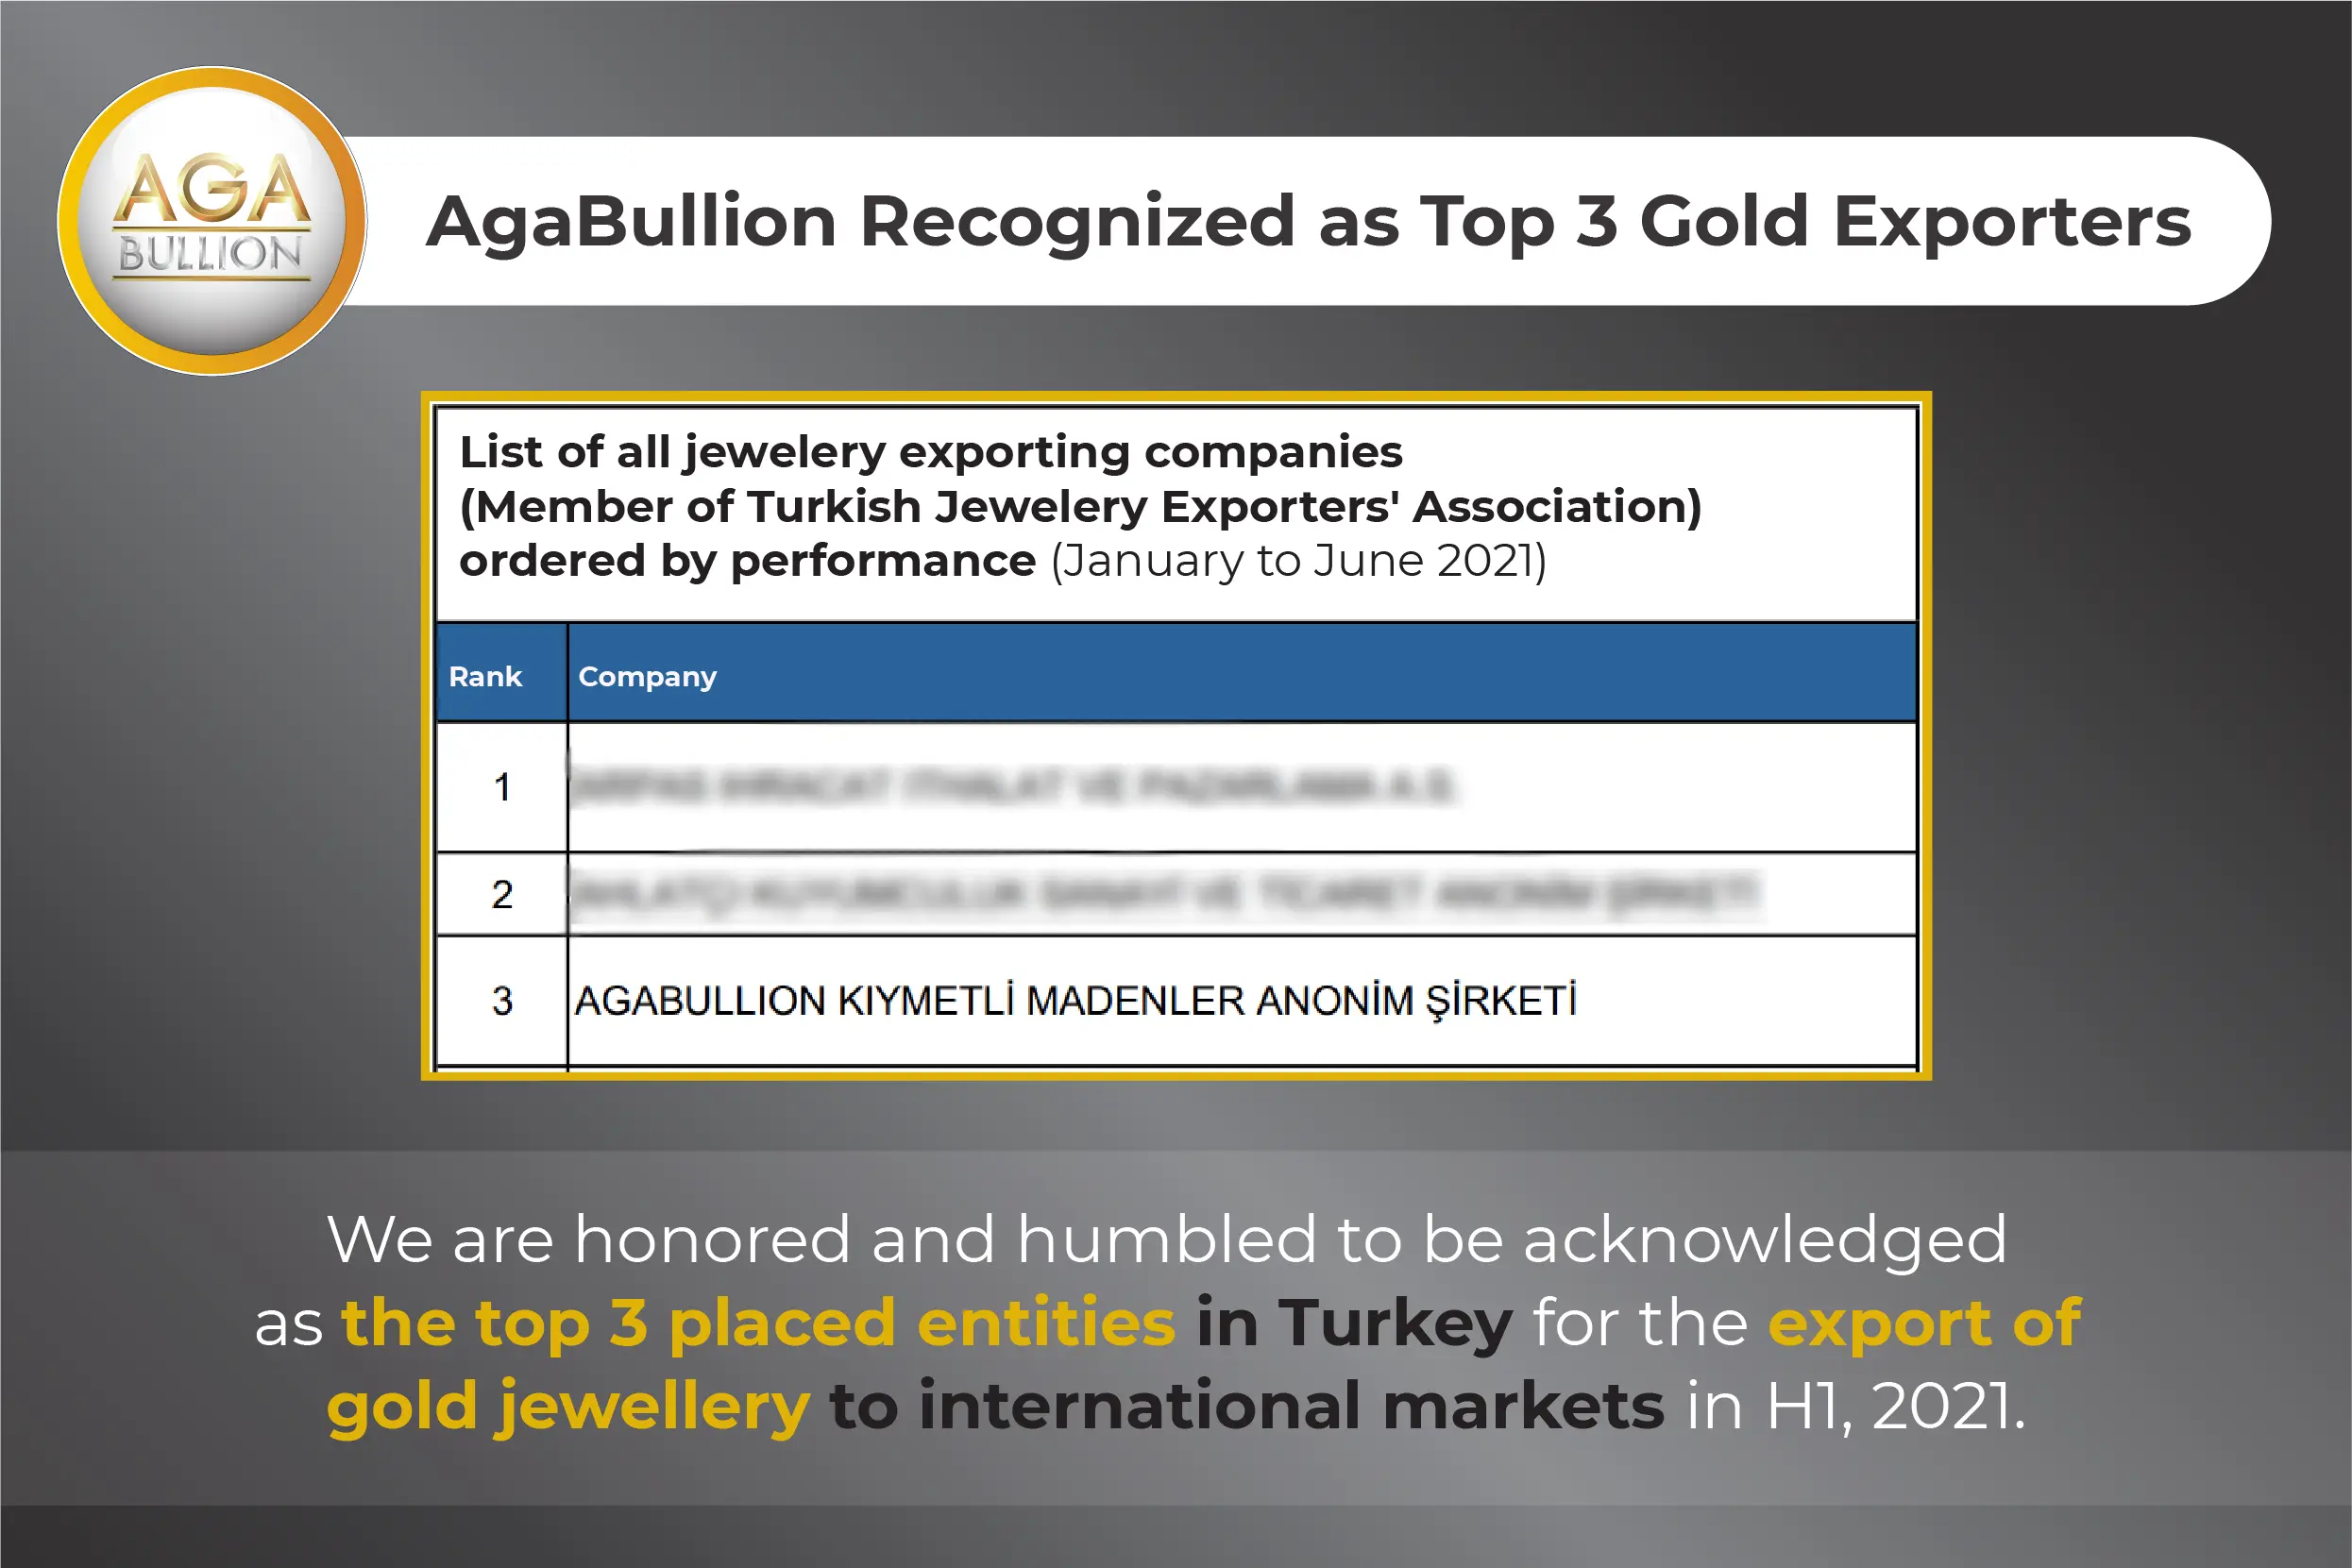 AgaBullion Recognized as Top 3 Gold Exporters